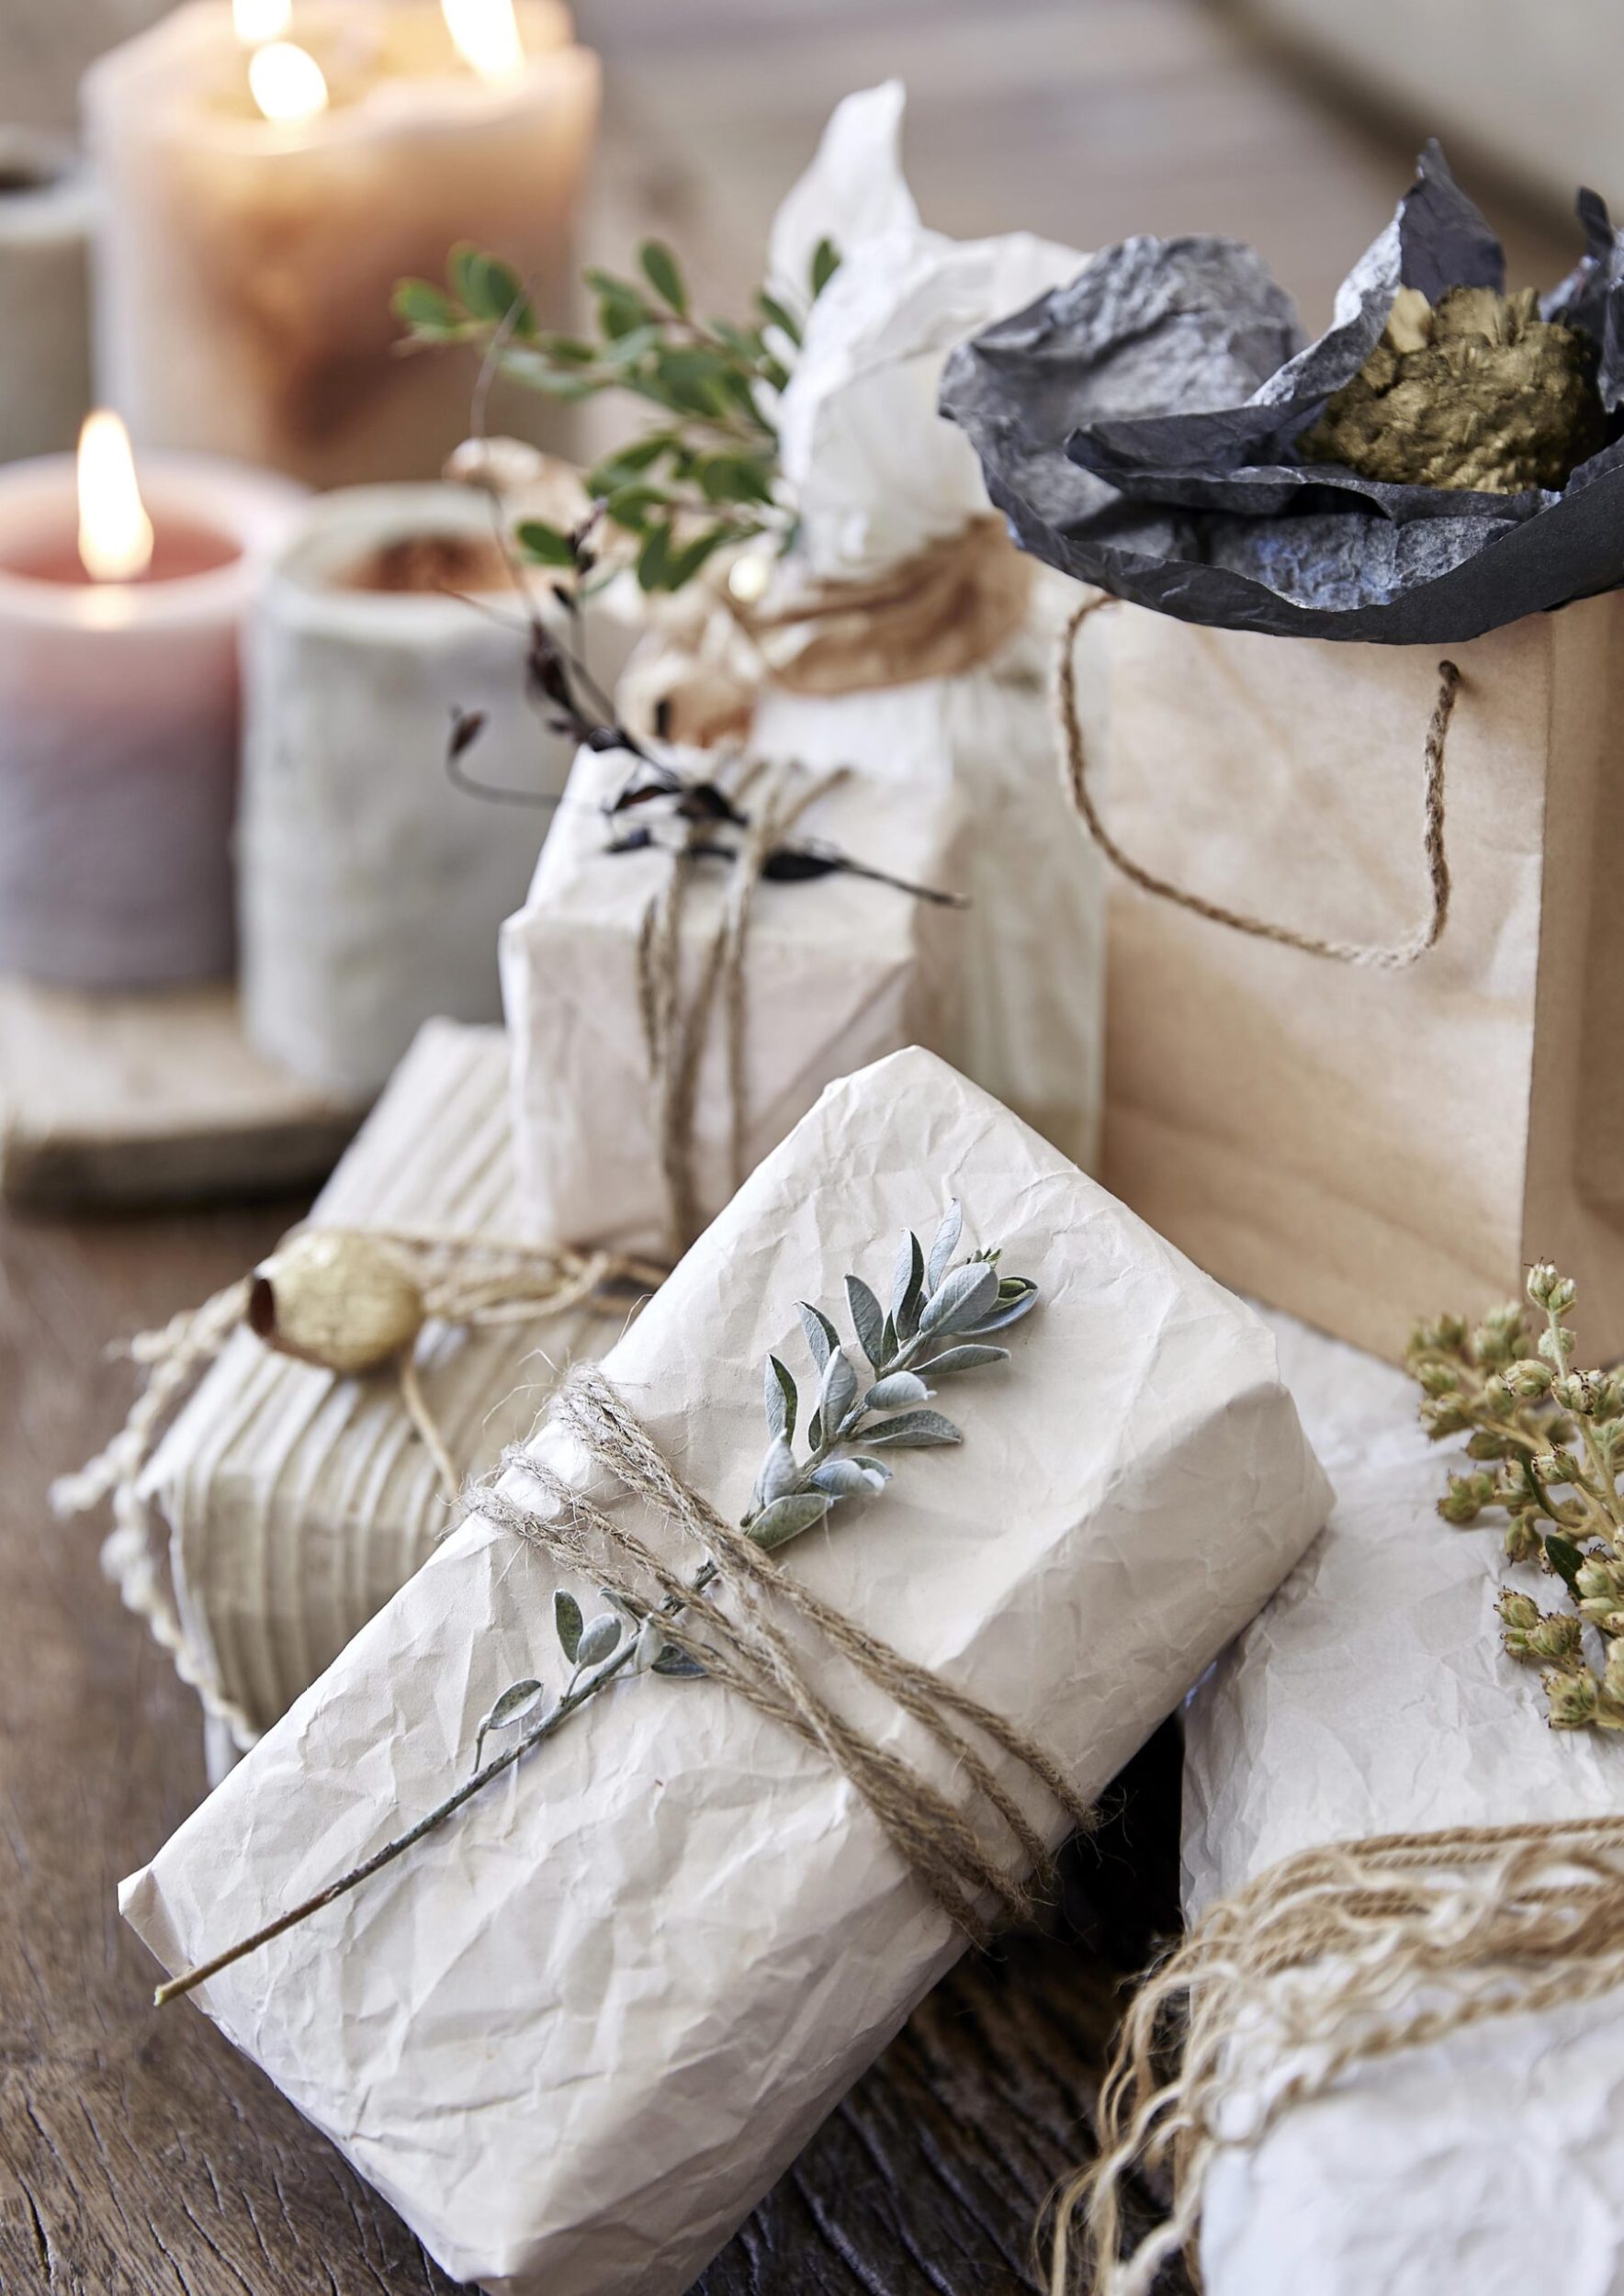 Presents wrapped with natural cloth